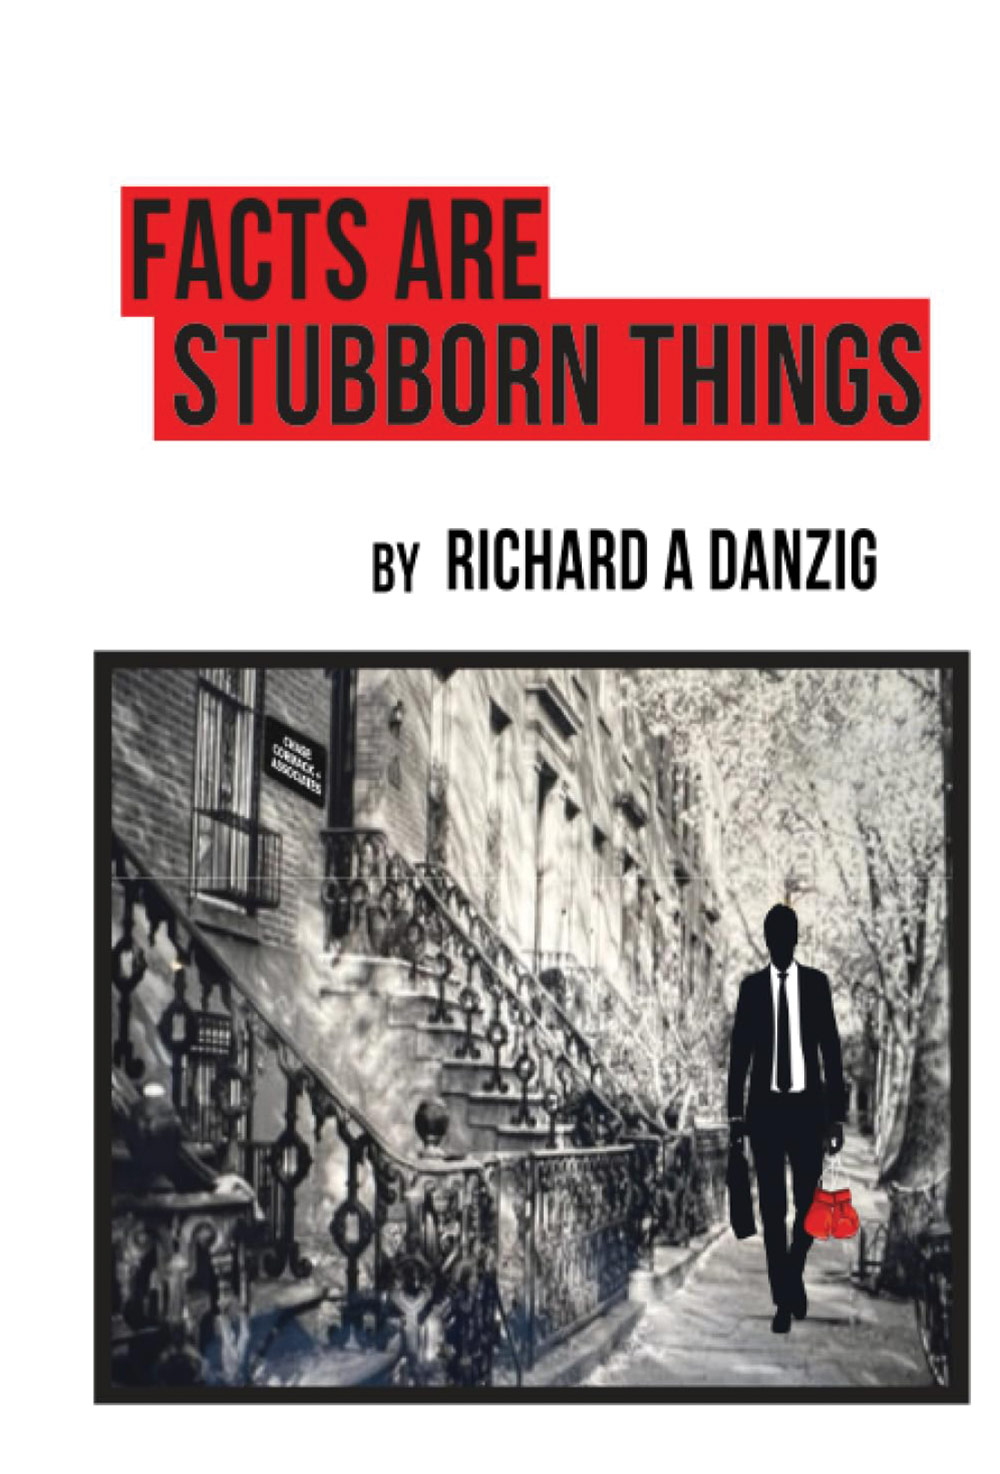 Front book cover of Facts Are Stubborn Things by Richard A Danzig while underneath the author byline is a small black and white border photo of a sidewalk plus buildings as a silhouette man in a suit and tie walks holding a pair of boxing gloves